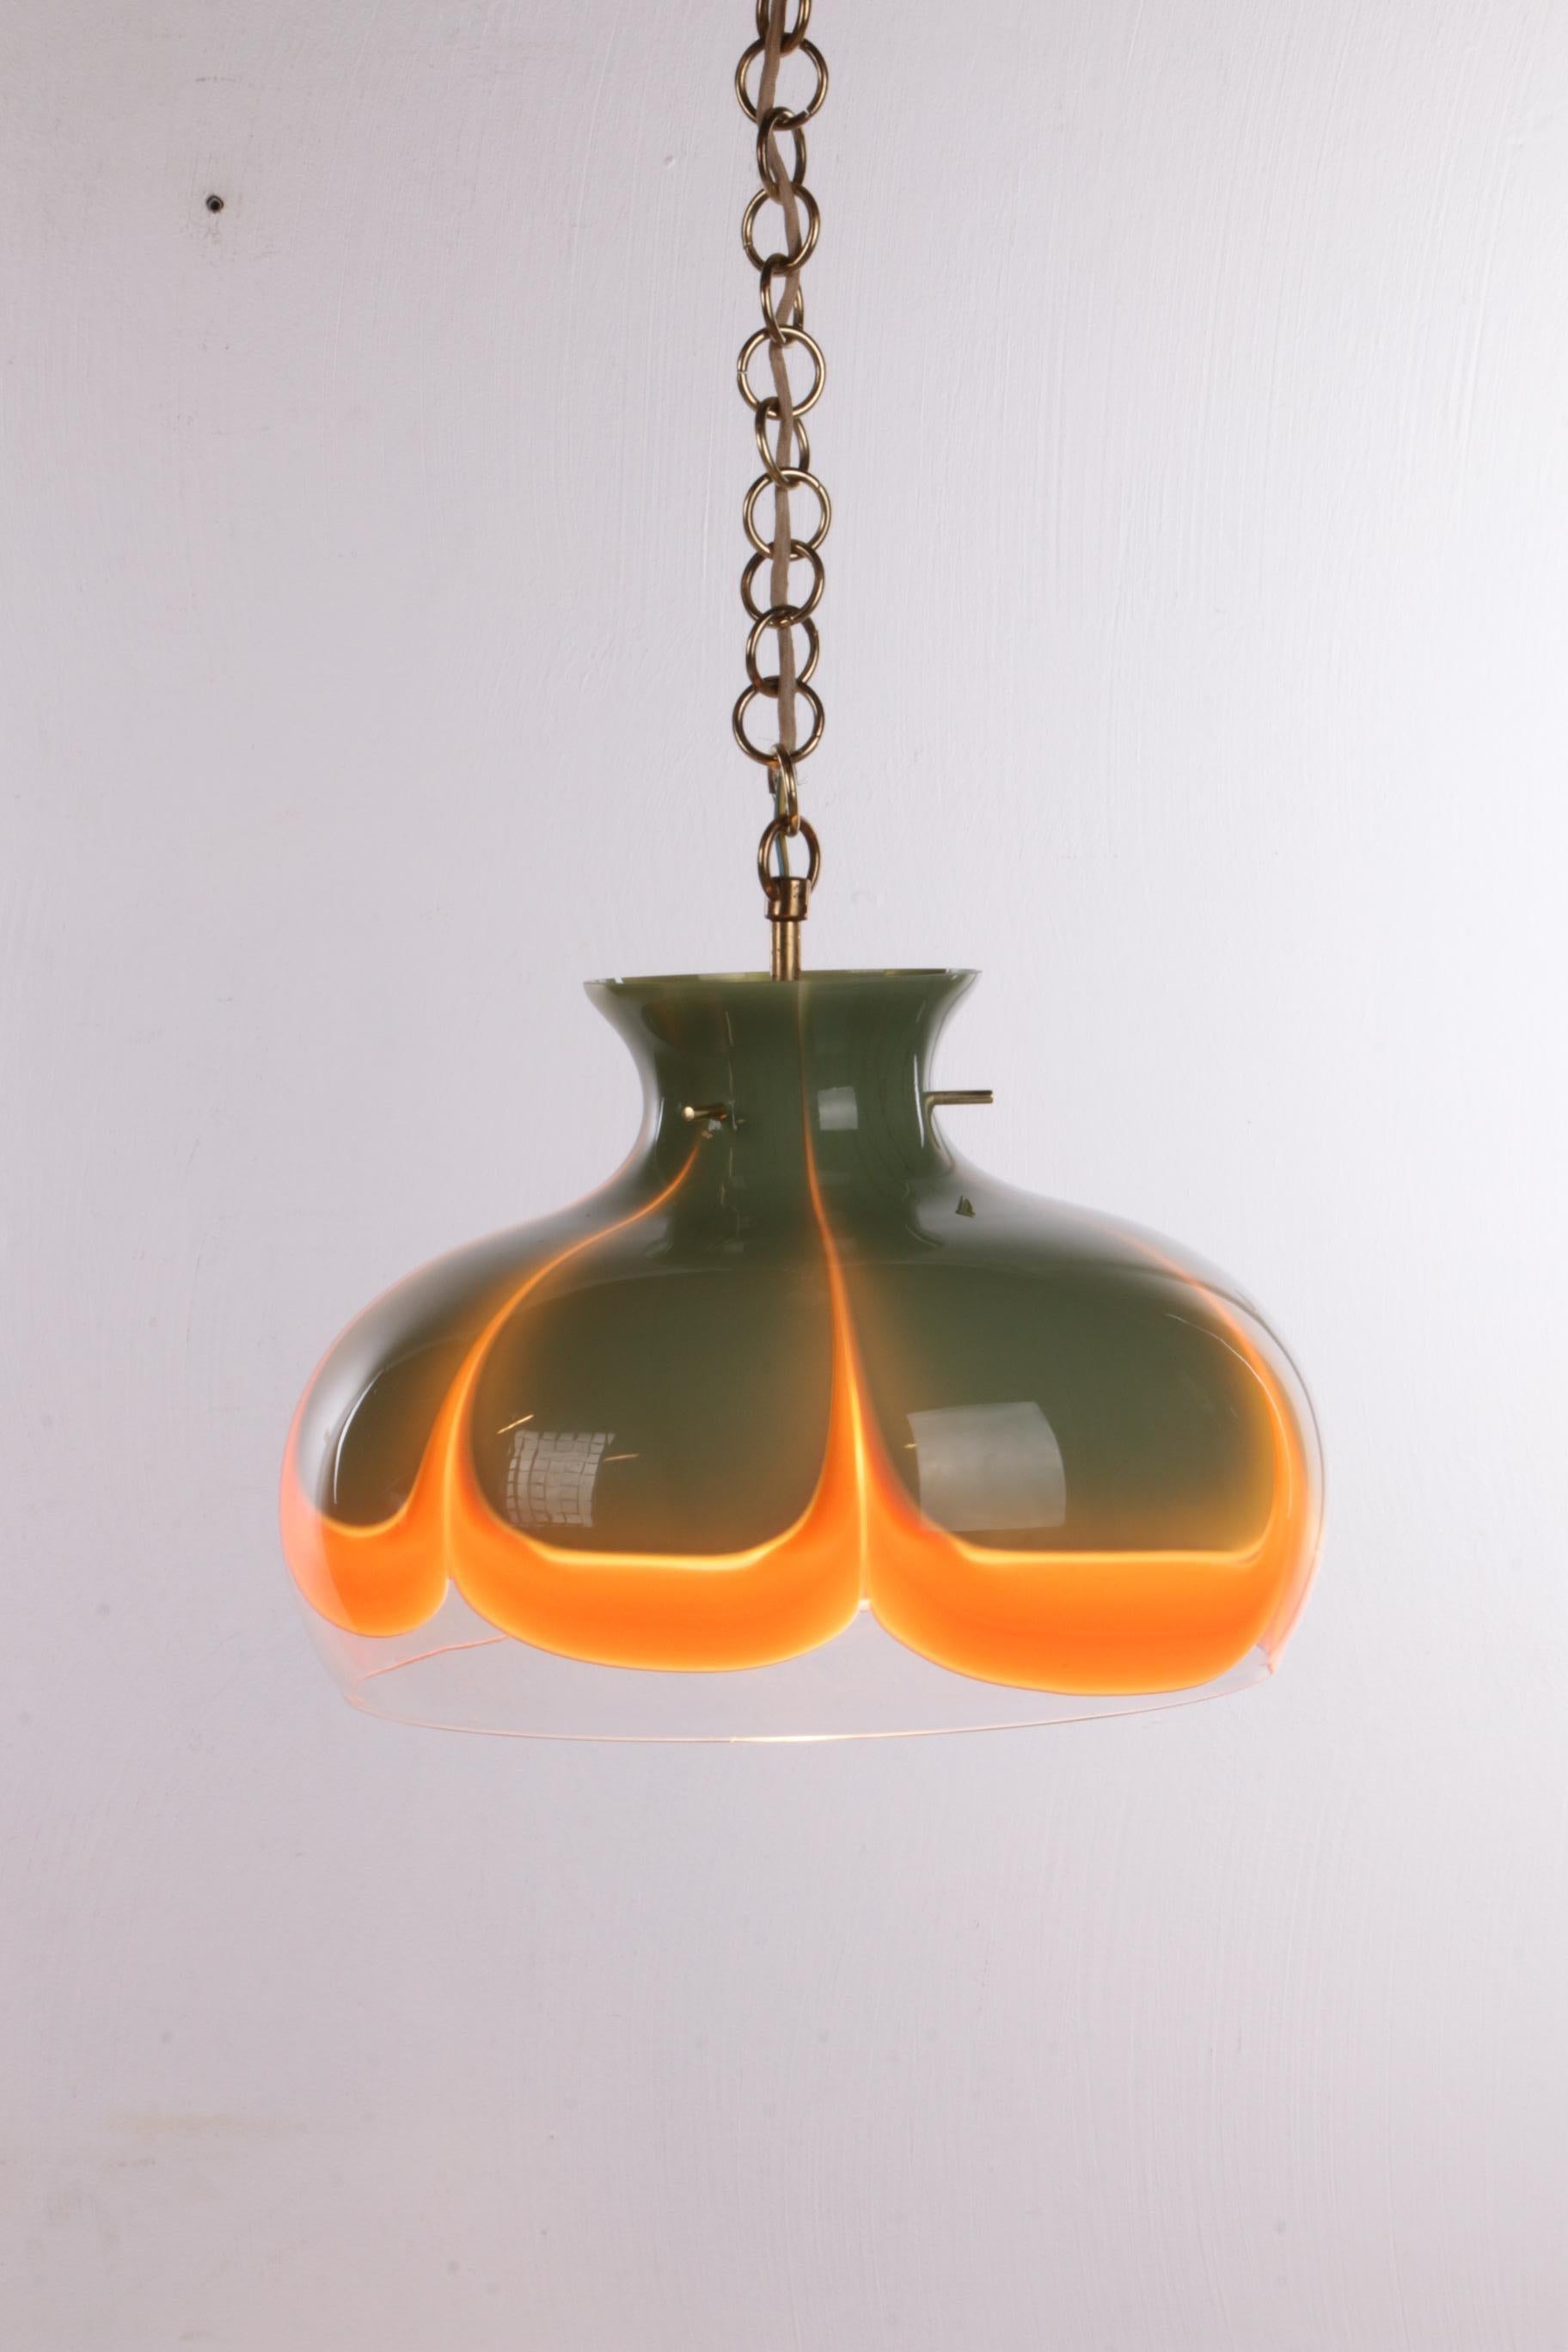 German Spage Age Hanging Lamp Kaiser Leuchten with Murano Glass For Sale